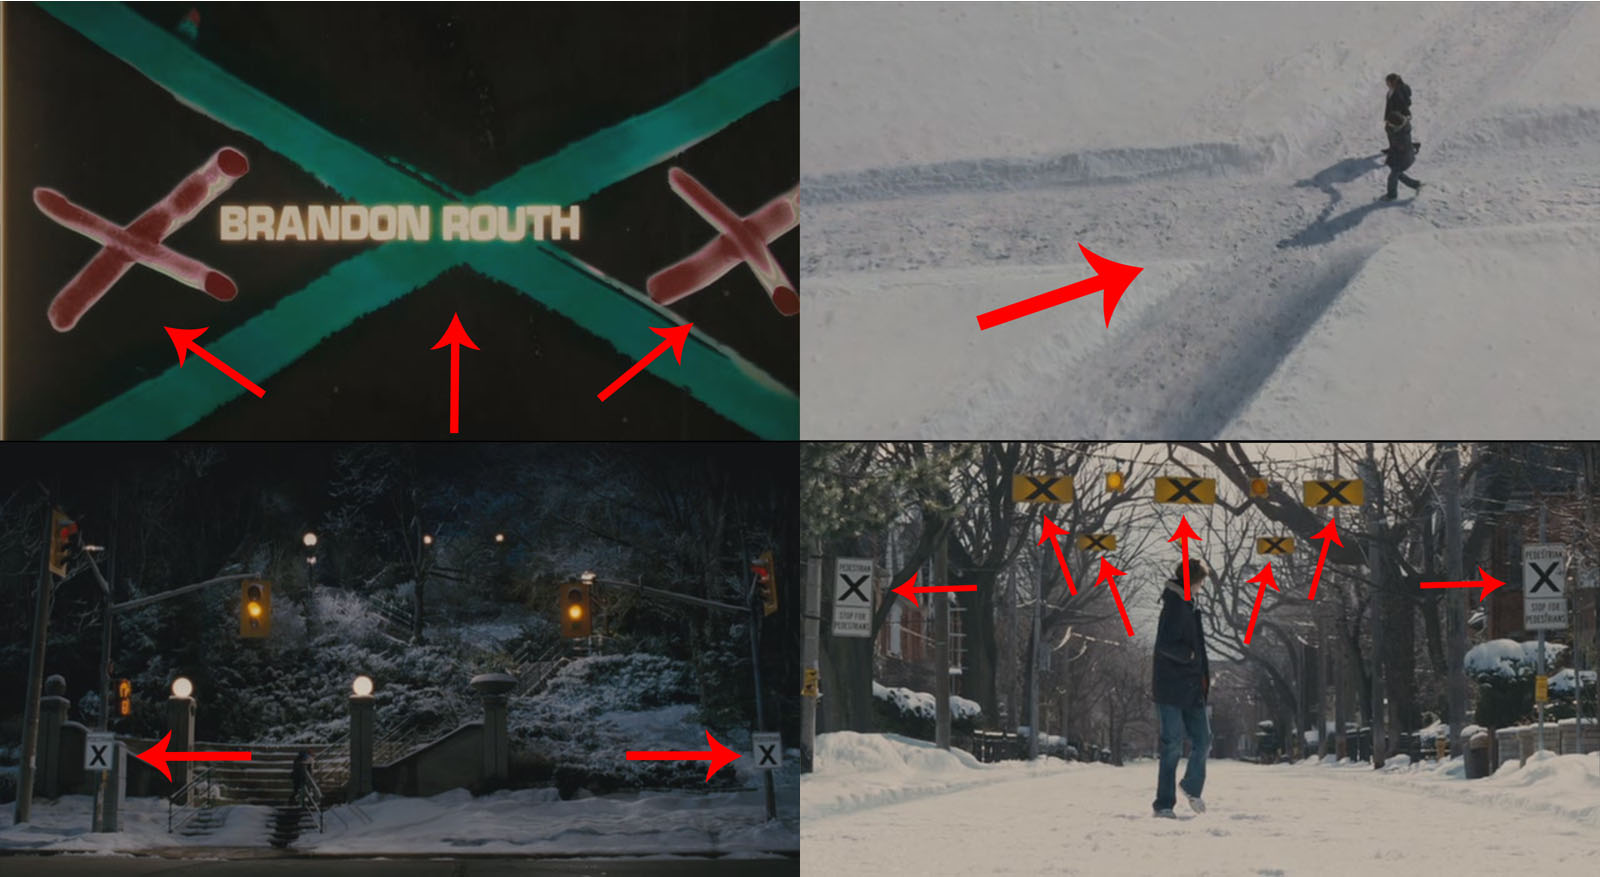 this image shows other times X symbols appeared in Scott Pilgrim vs. the World to represent the evil exes.